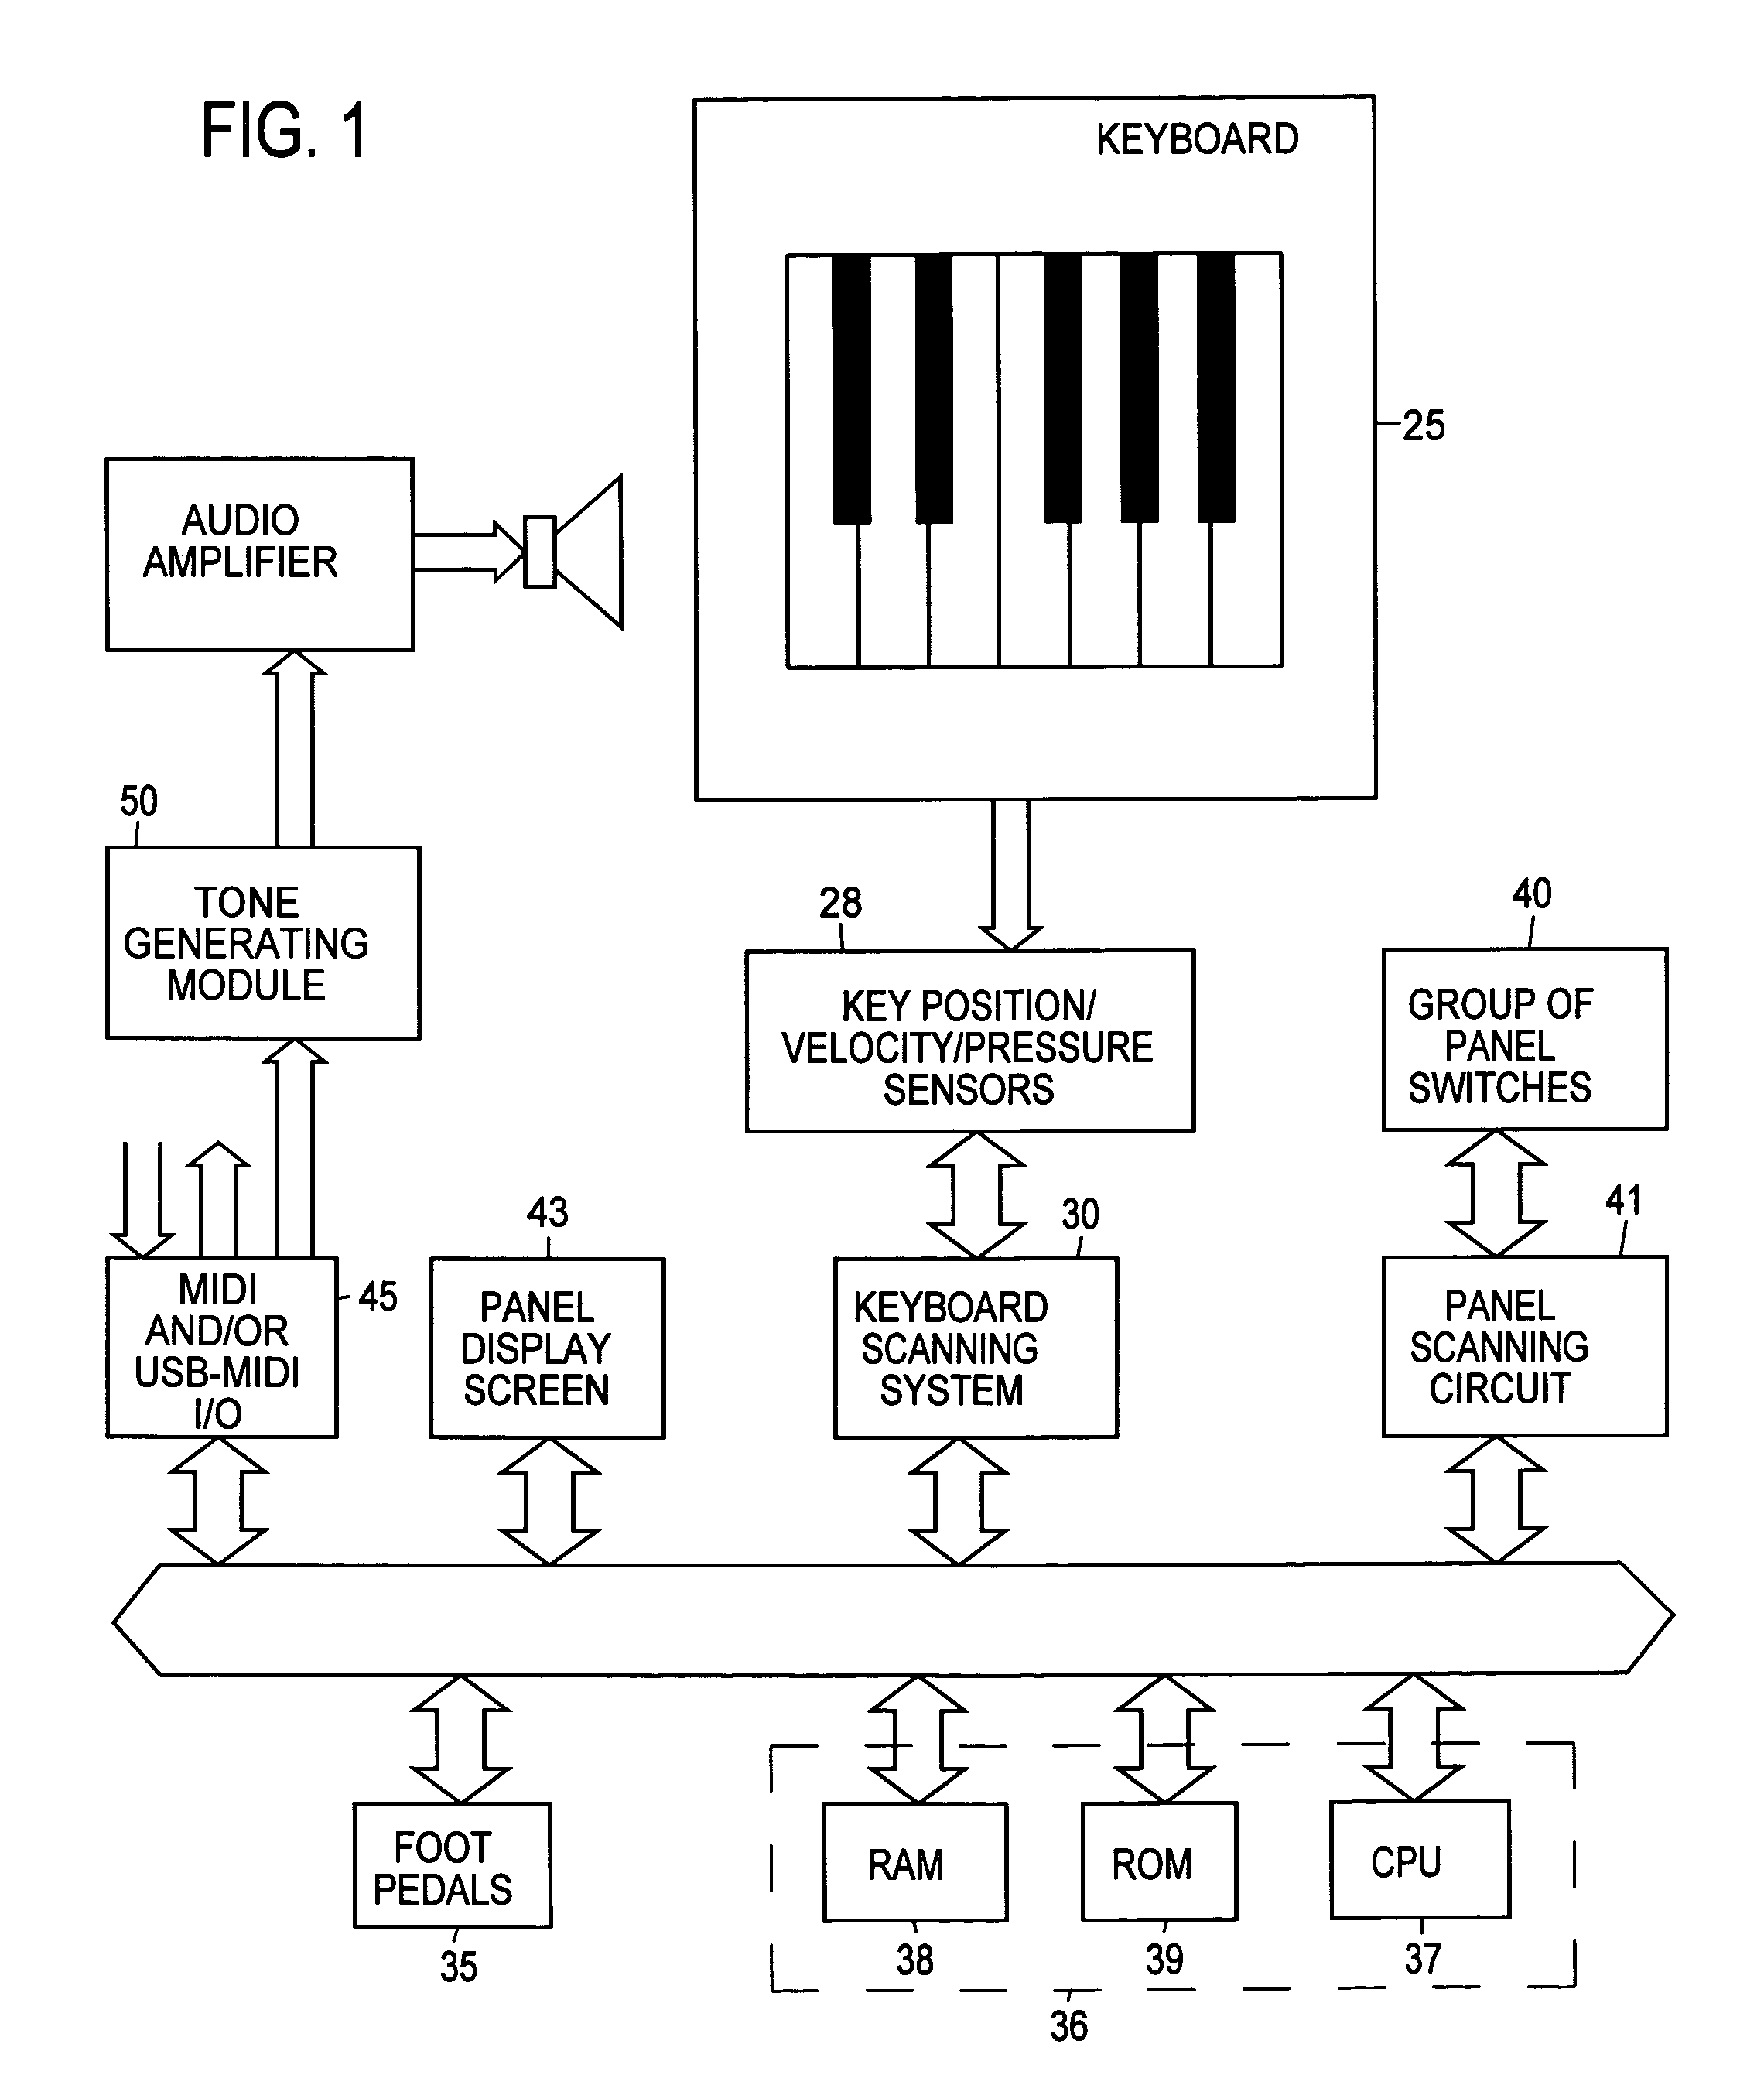 Method for producing real-time rhythm guitar performance with keyboard